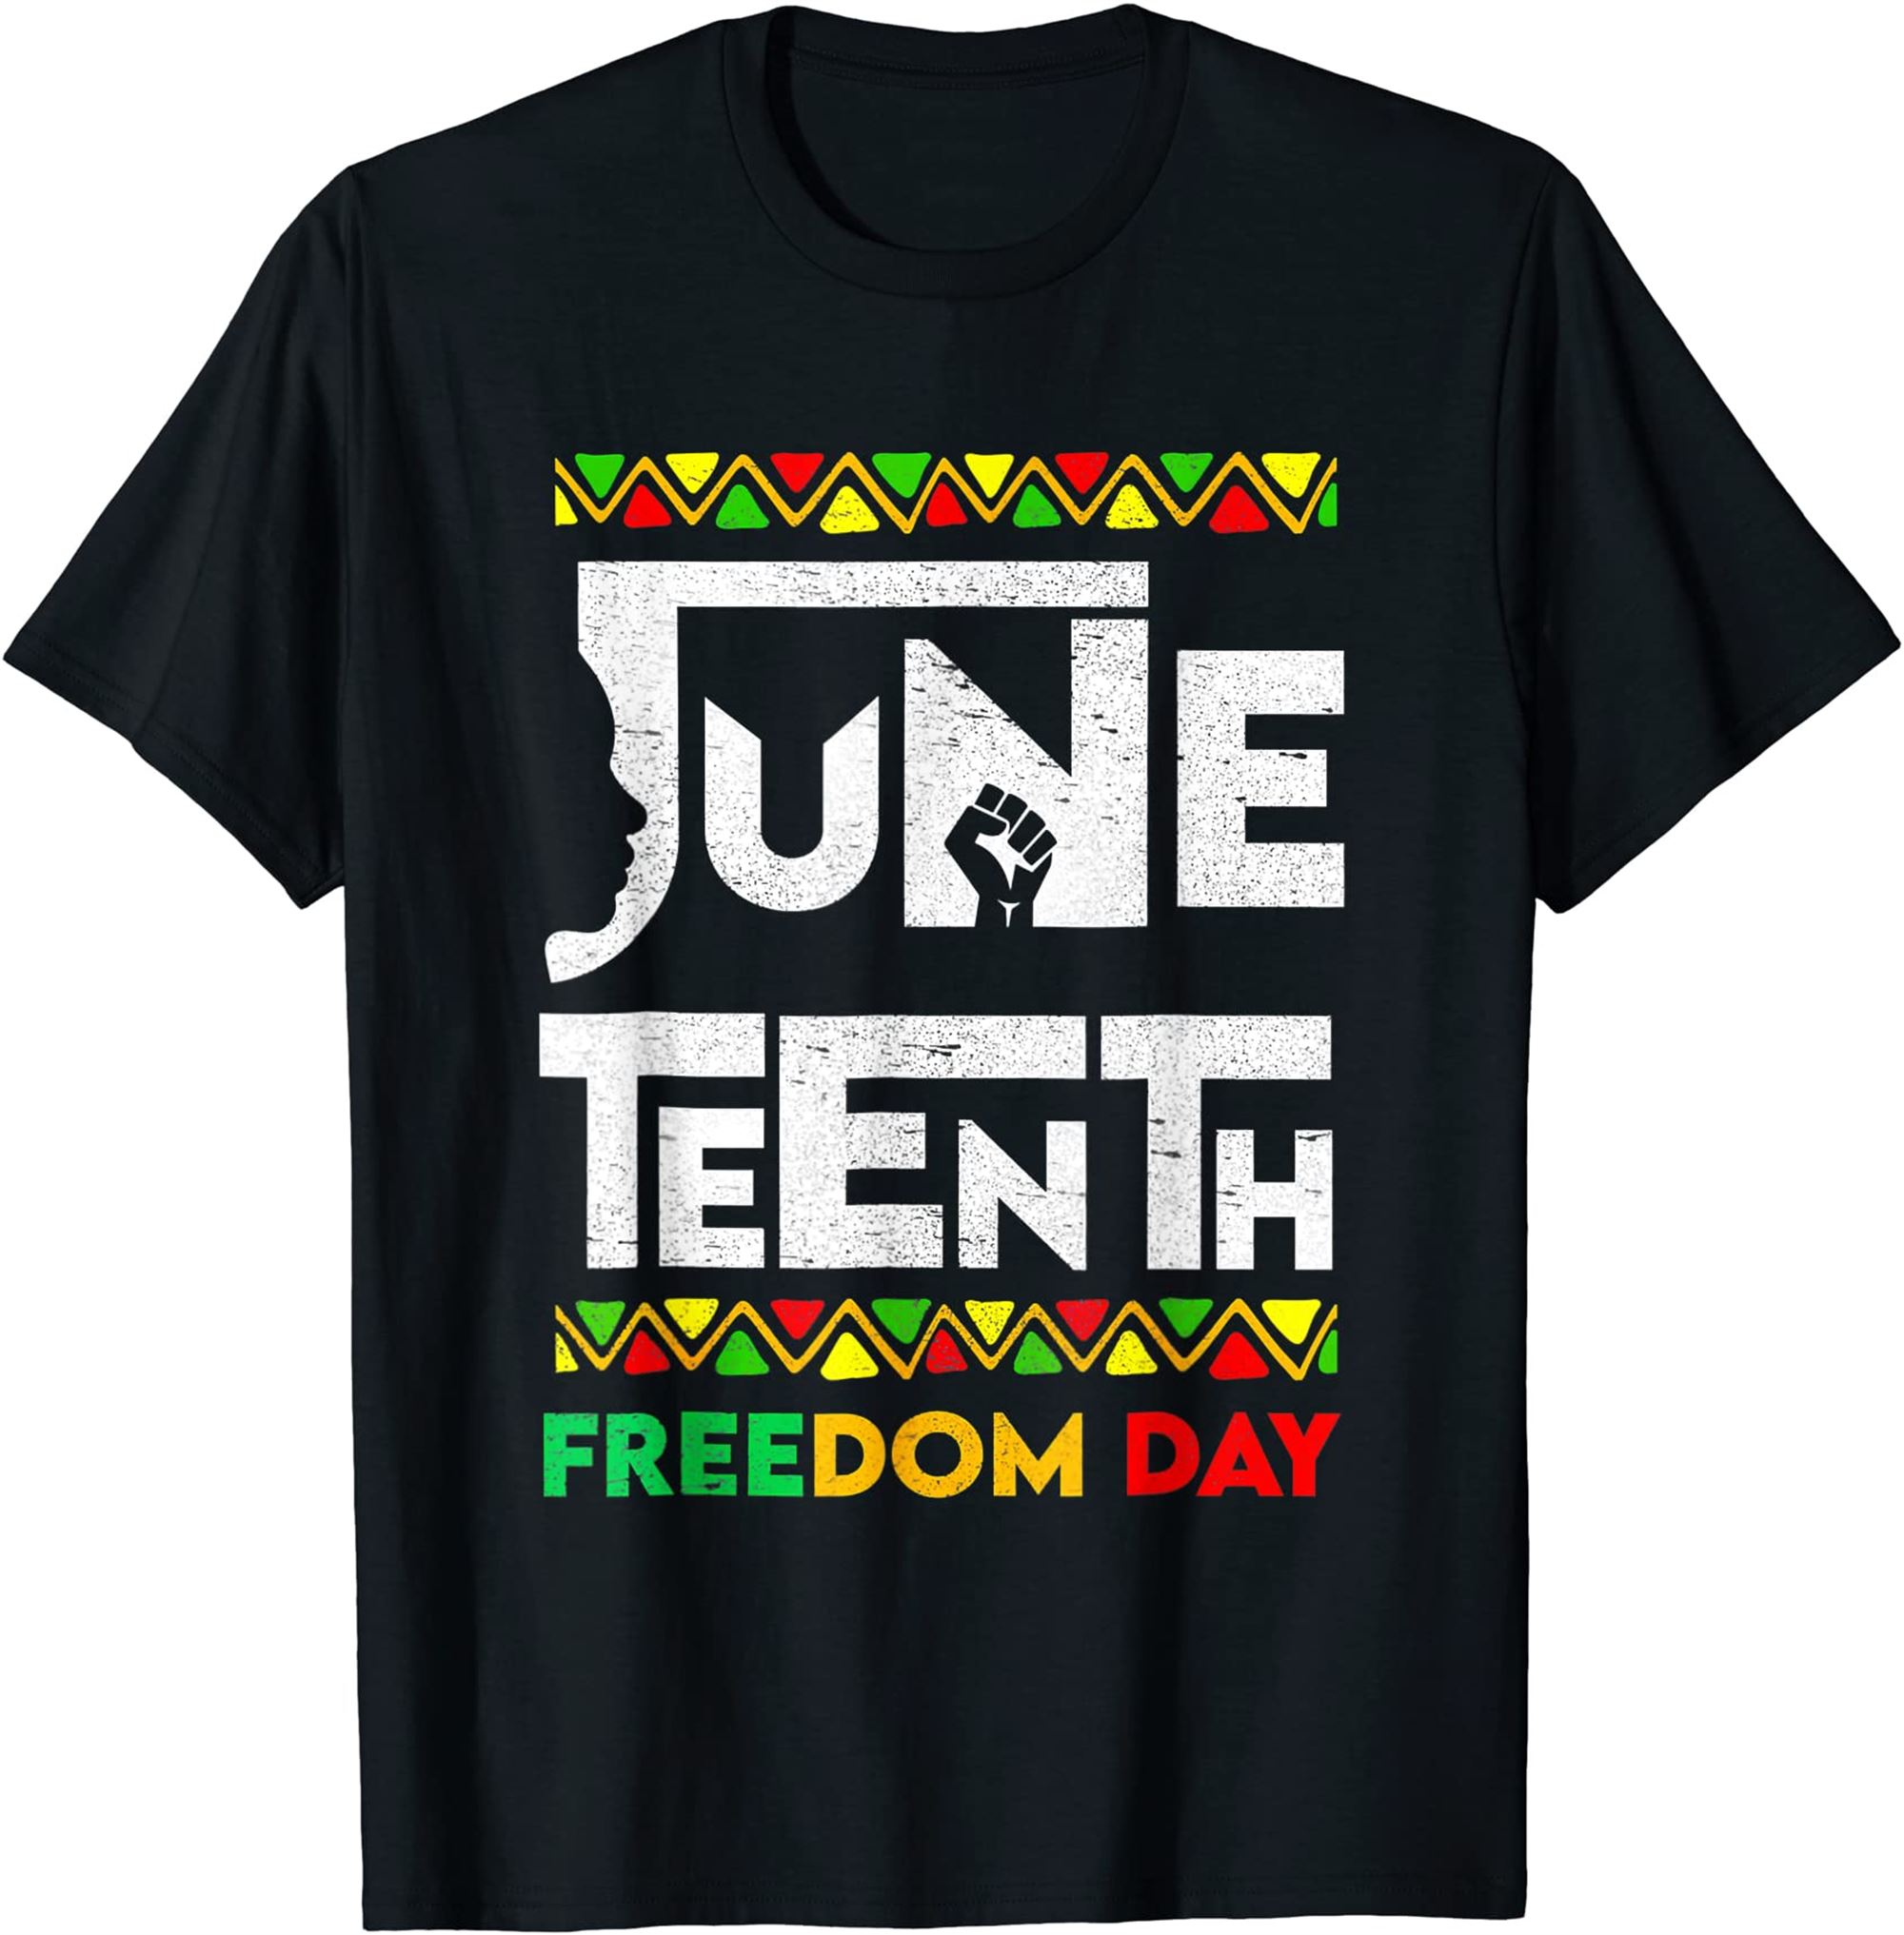 Retro Juneteenth Since 1865 Black History Month Freedom Day T-shirt Size Up To 5xl